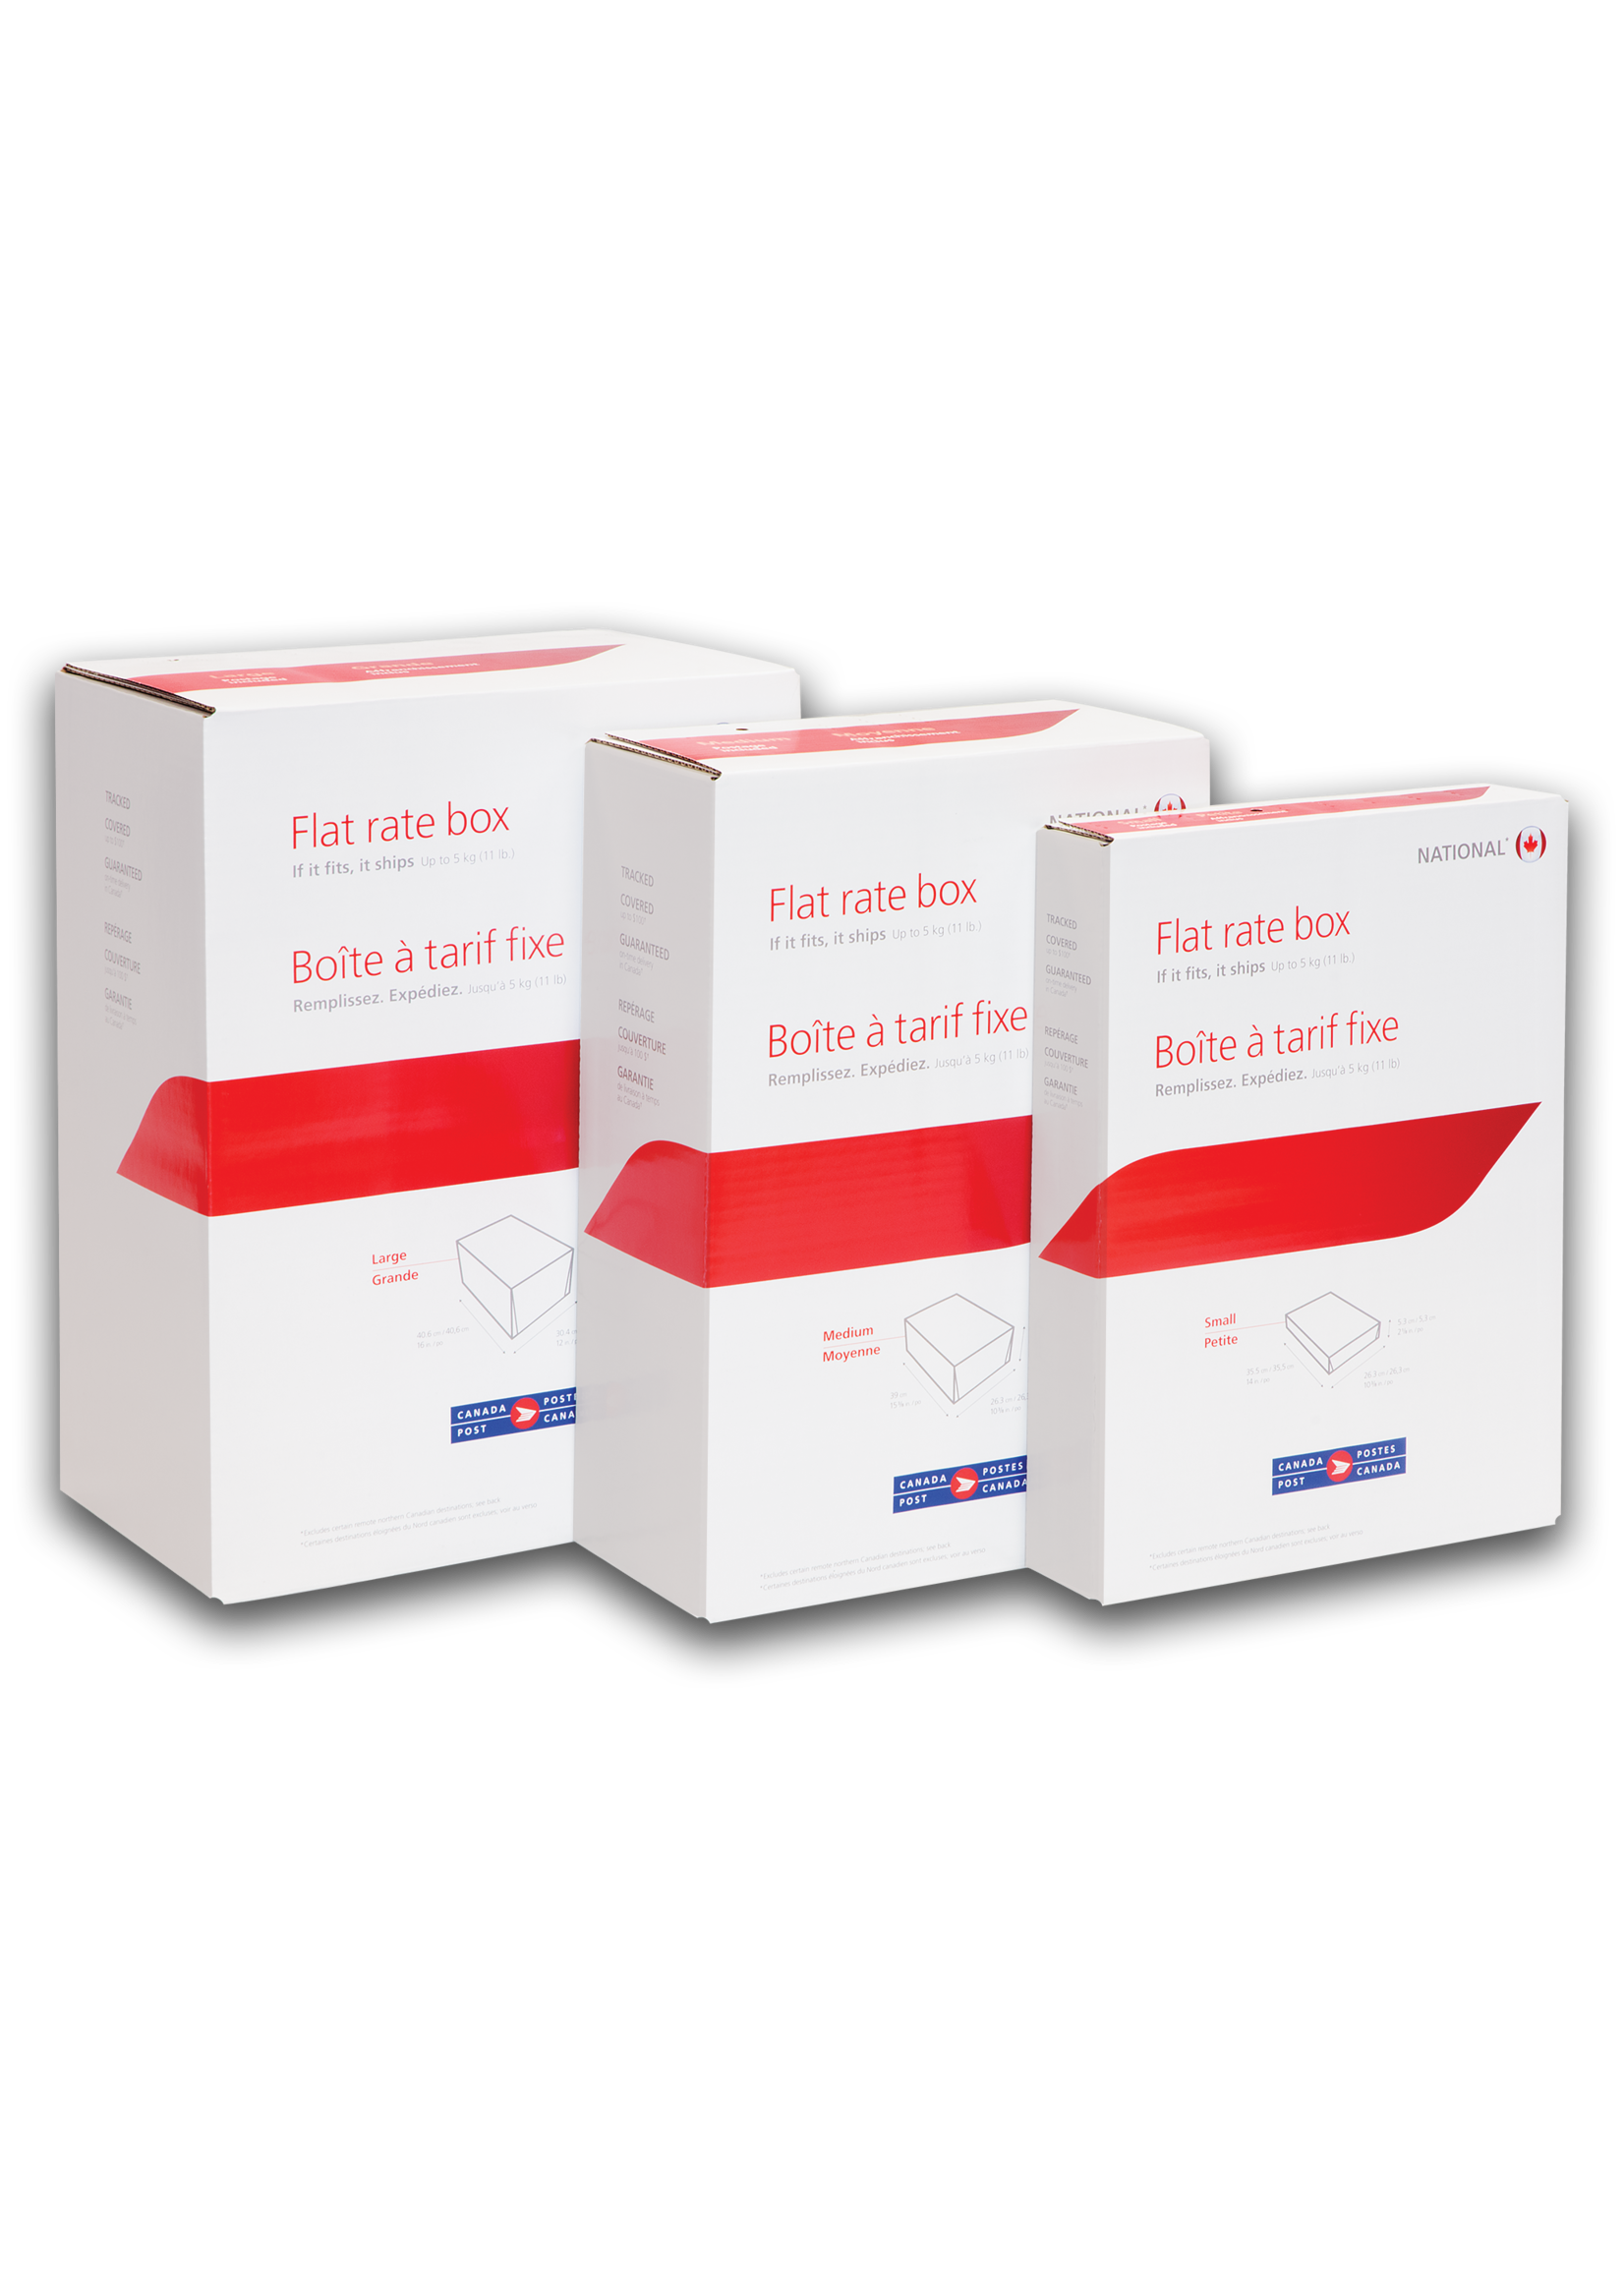 SHIPPING & HANDLING. Canada Post Small Flat Rate